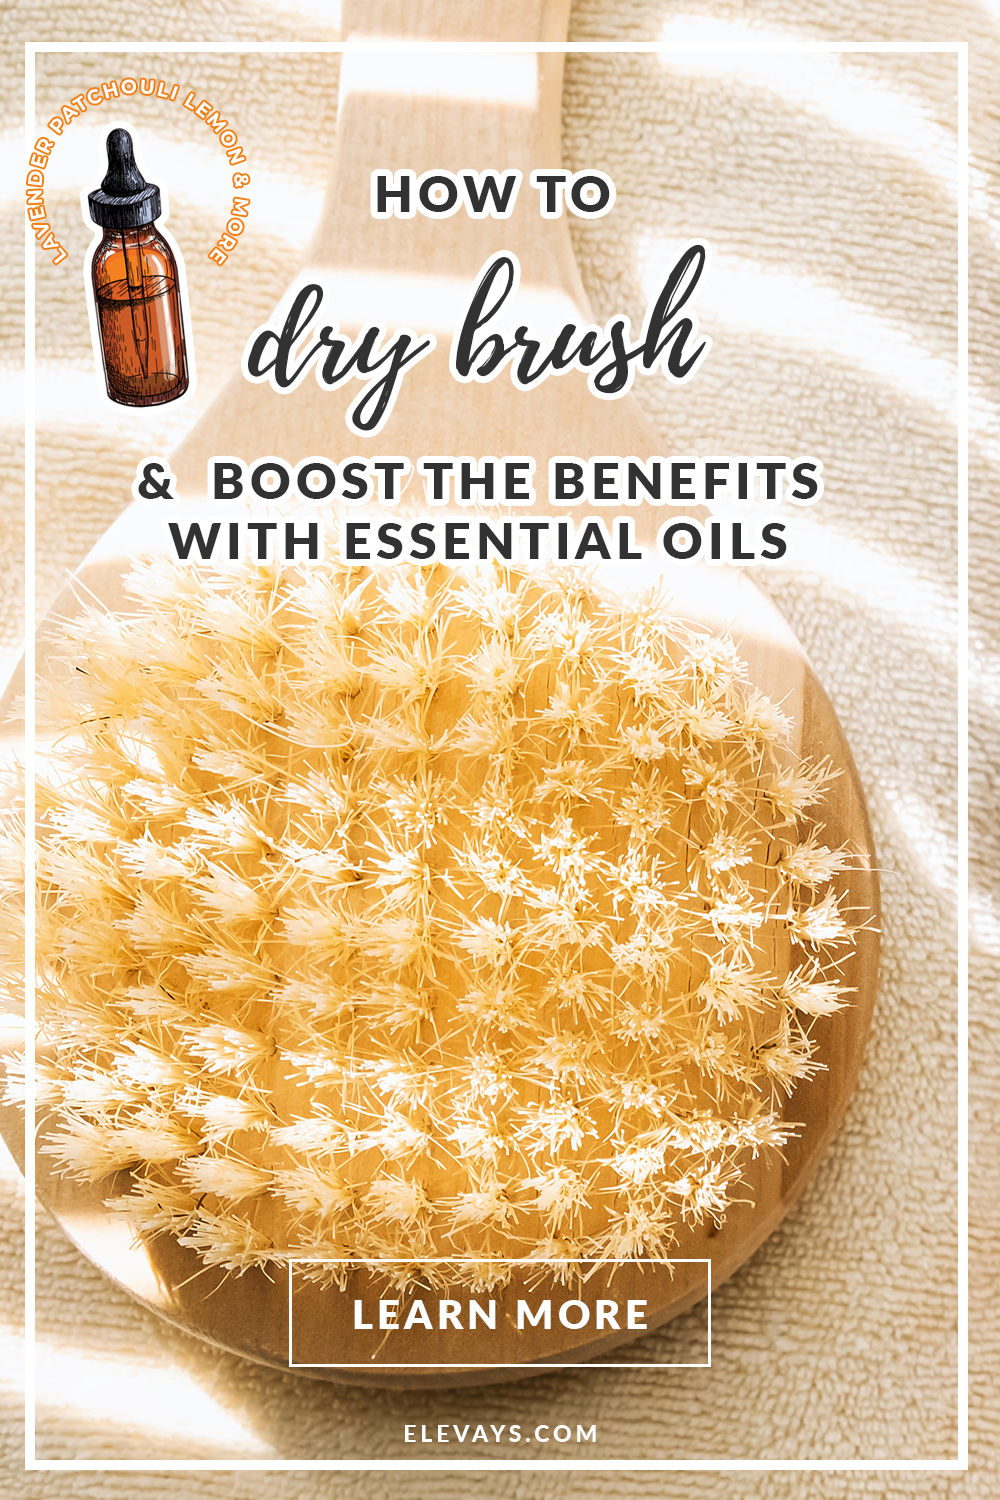 How to Dry Brush & The Benefits of Dry Brushing with Essential Oils